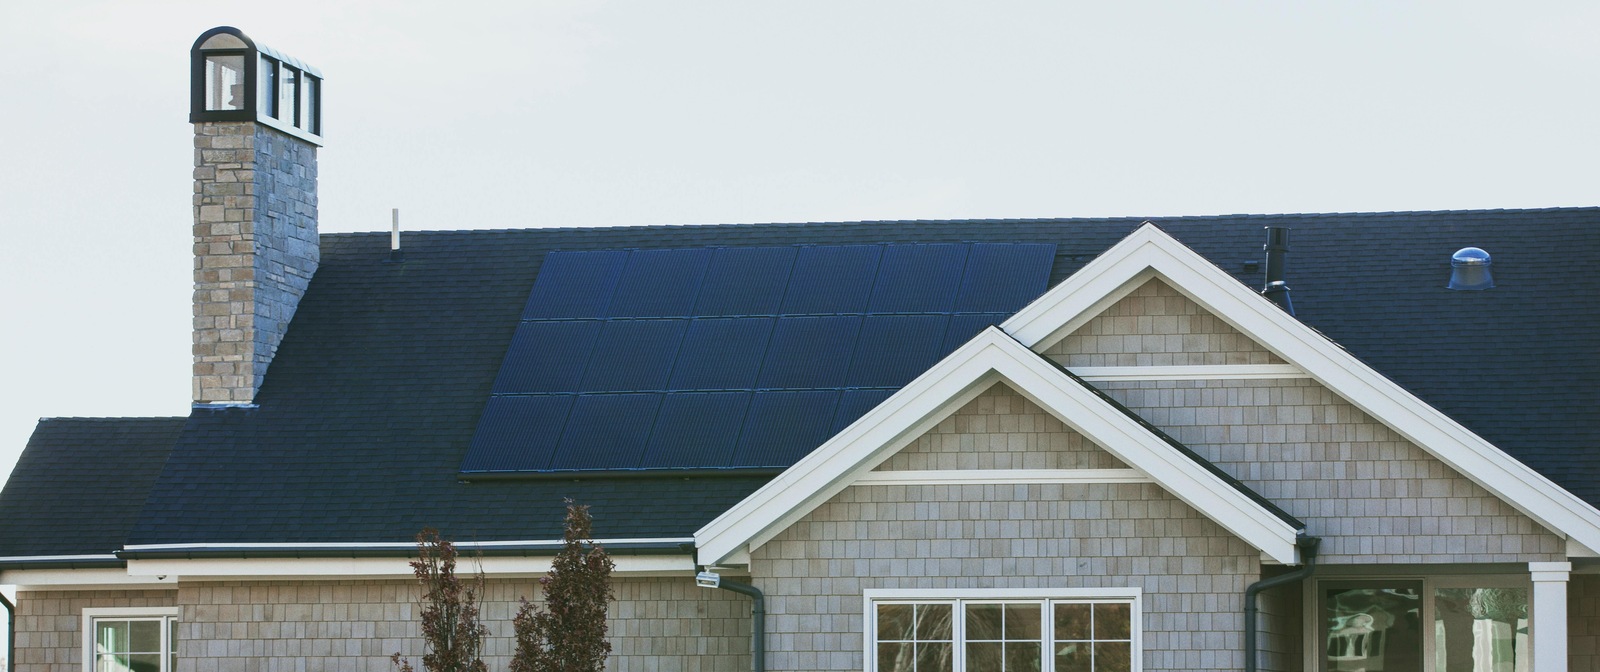 solar panels on roof of home in new hampshire tax write offs (1)